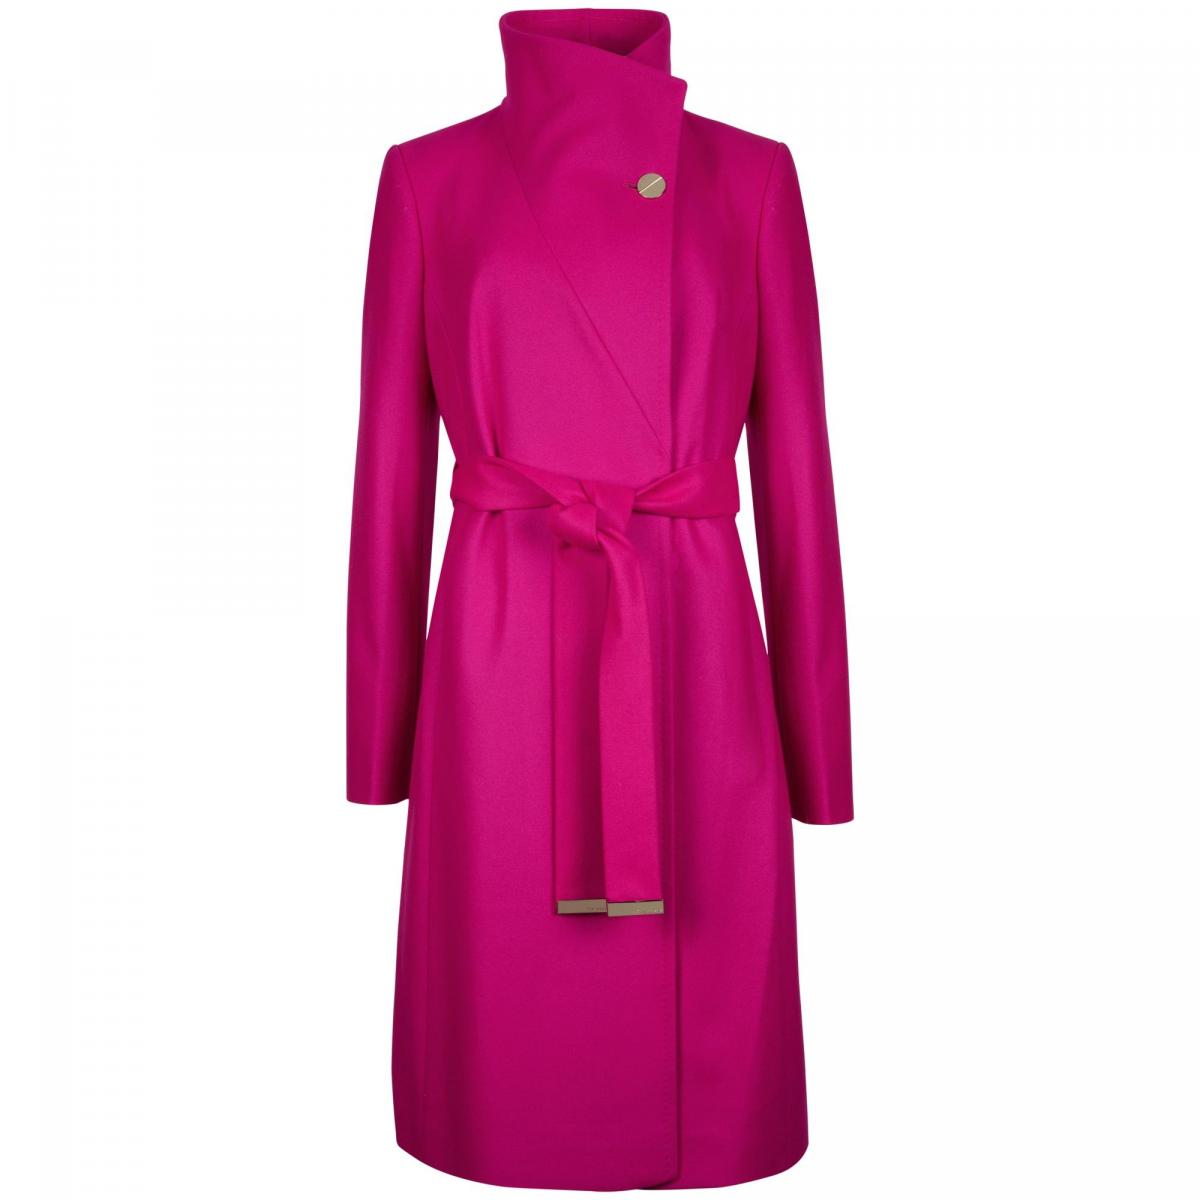 Ted Baker in John Lewis, Nevia belted wrap coat in deep pink, £299